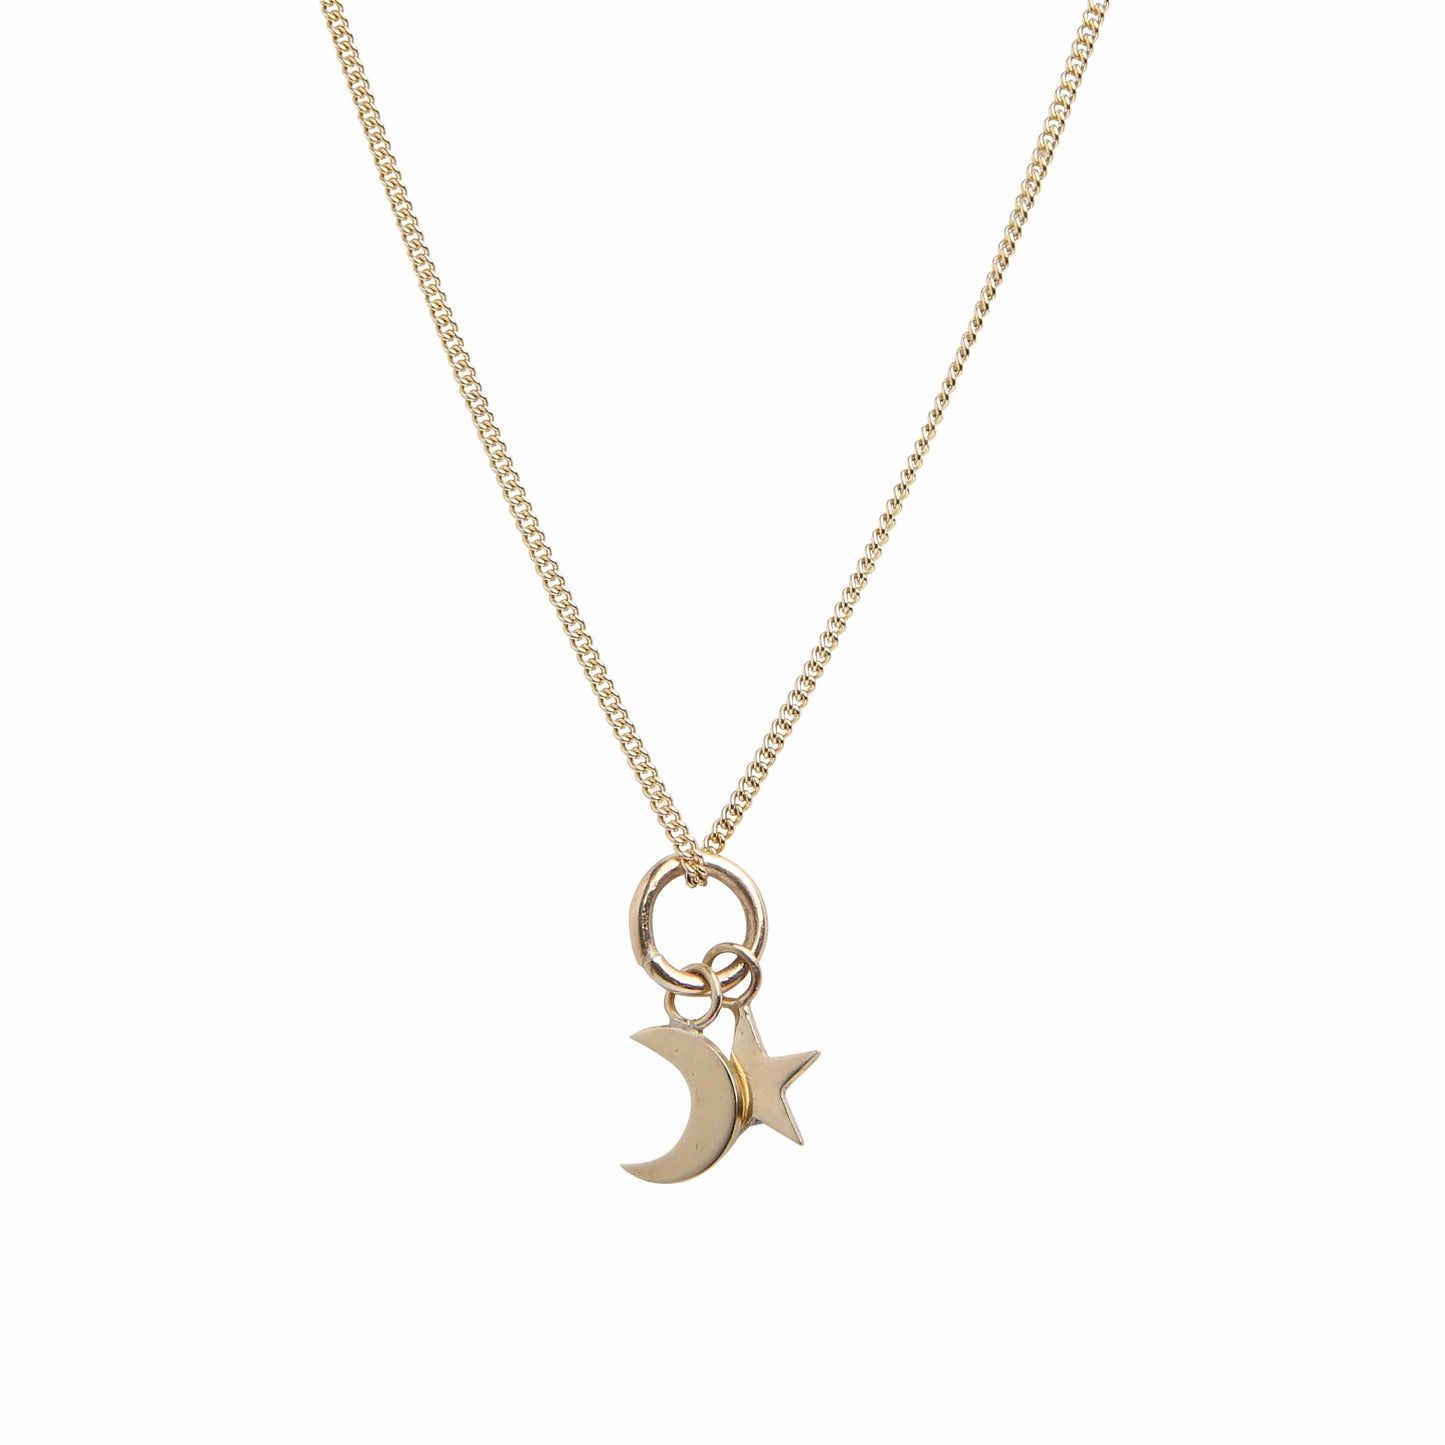 handmade gold moon and star pendant necklace